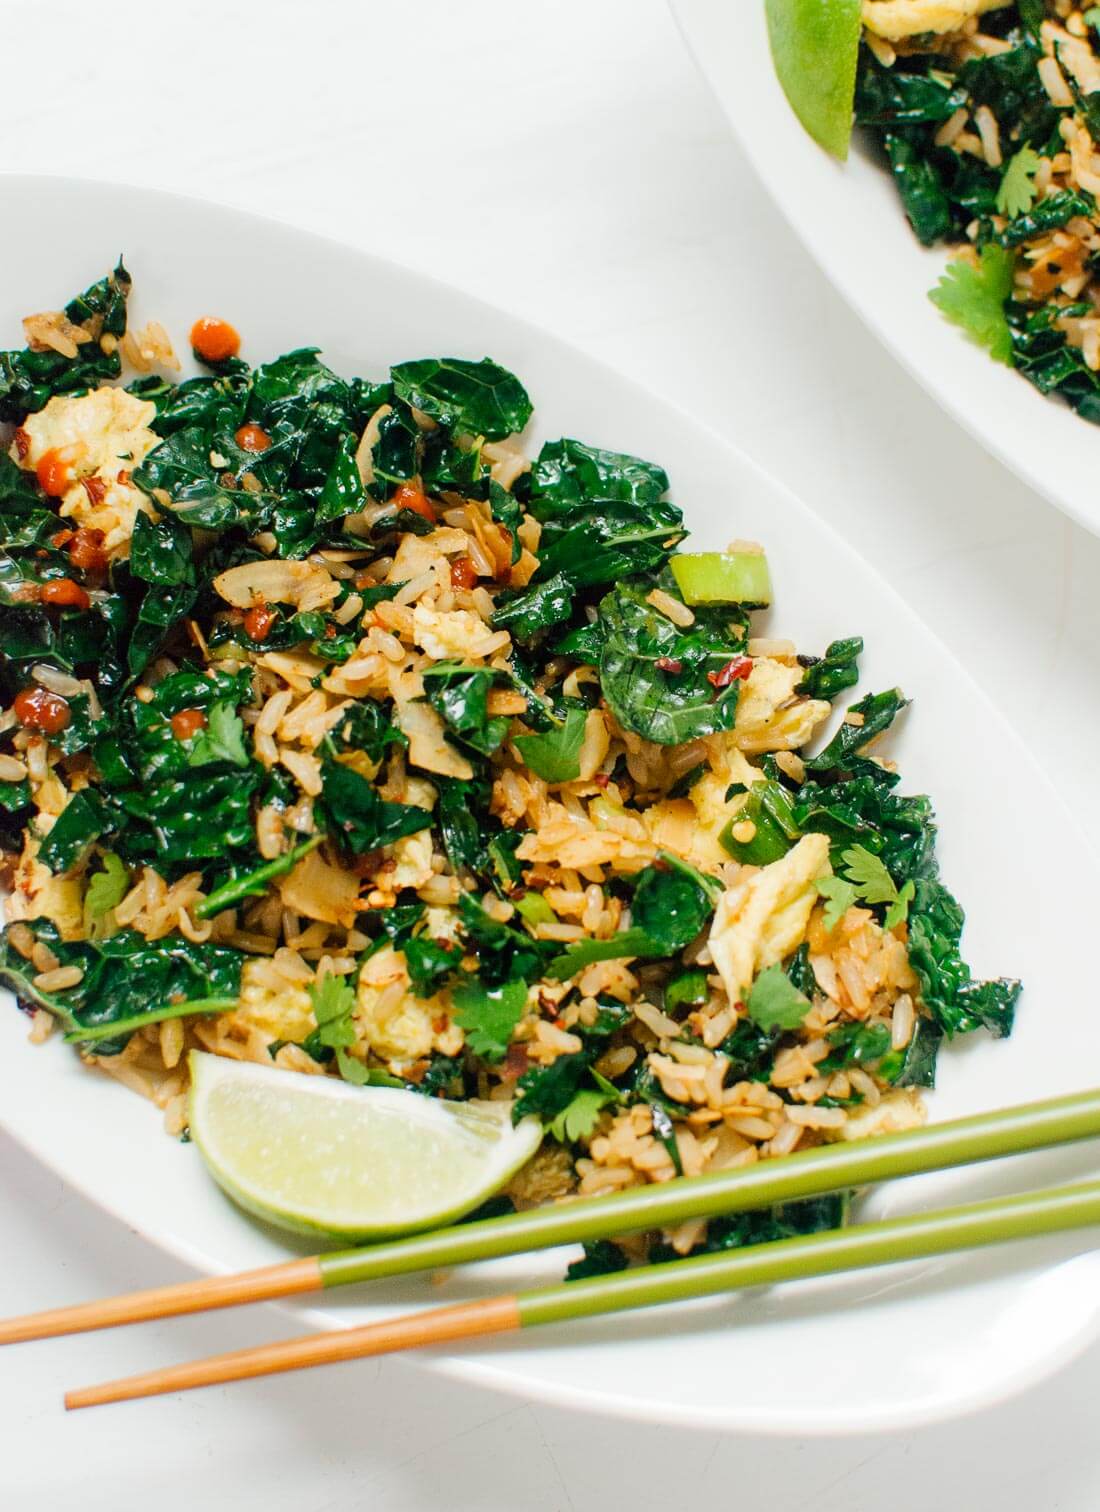 Spicy stir-fried kale with coconut and rice (gluten free) - cookieandkate.com